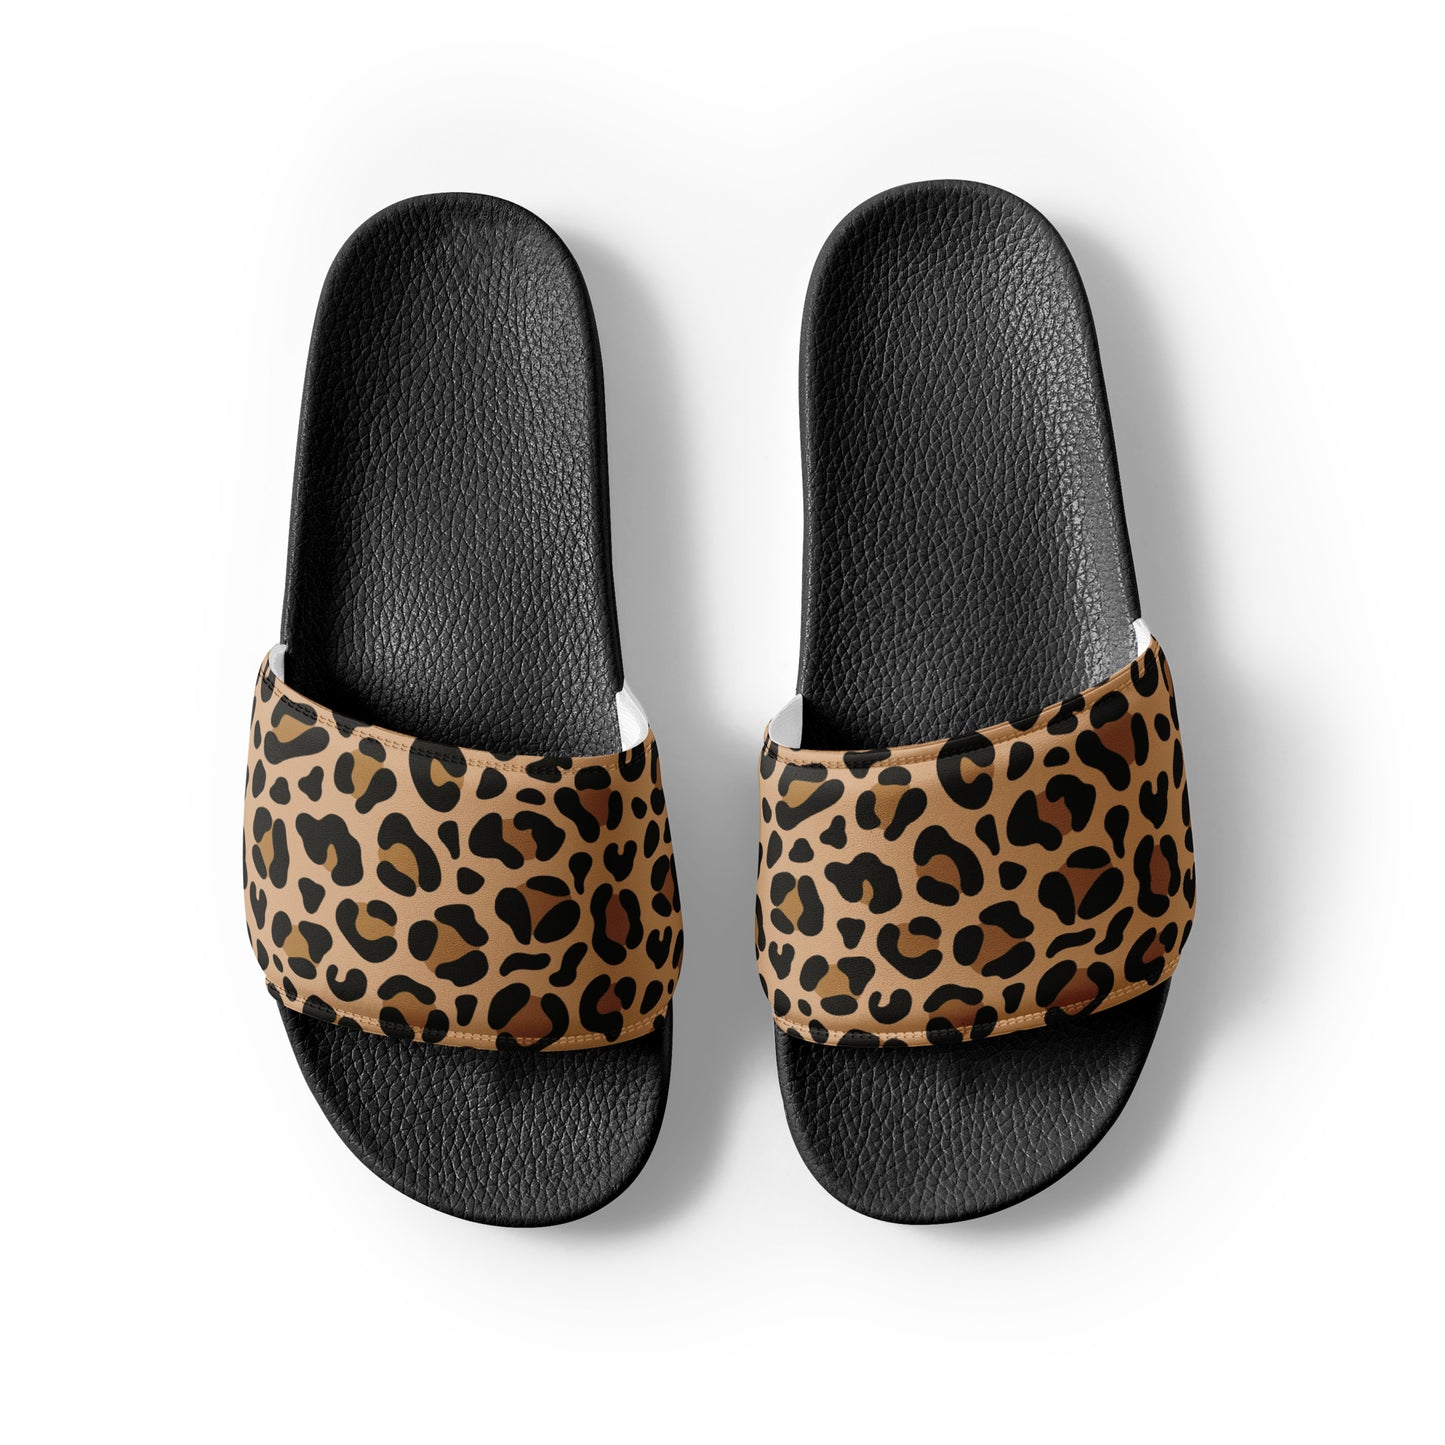 Women's Leopard Print Slides - Trendy and Comfortable Slip-Ons